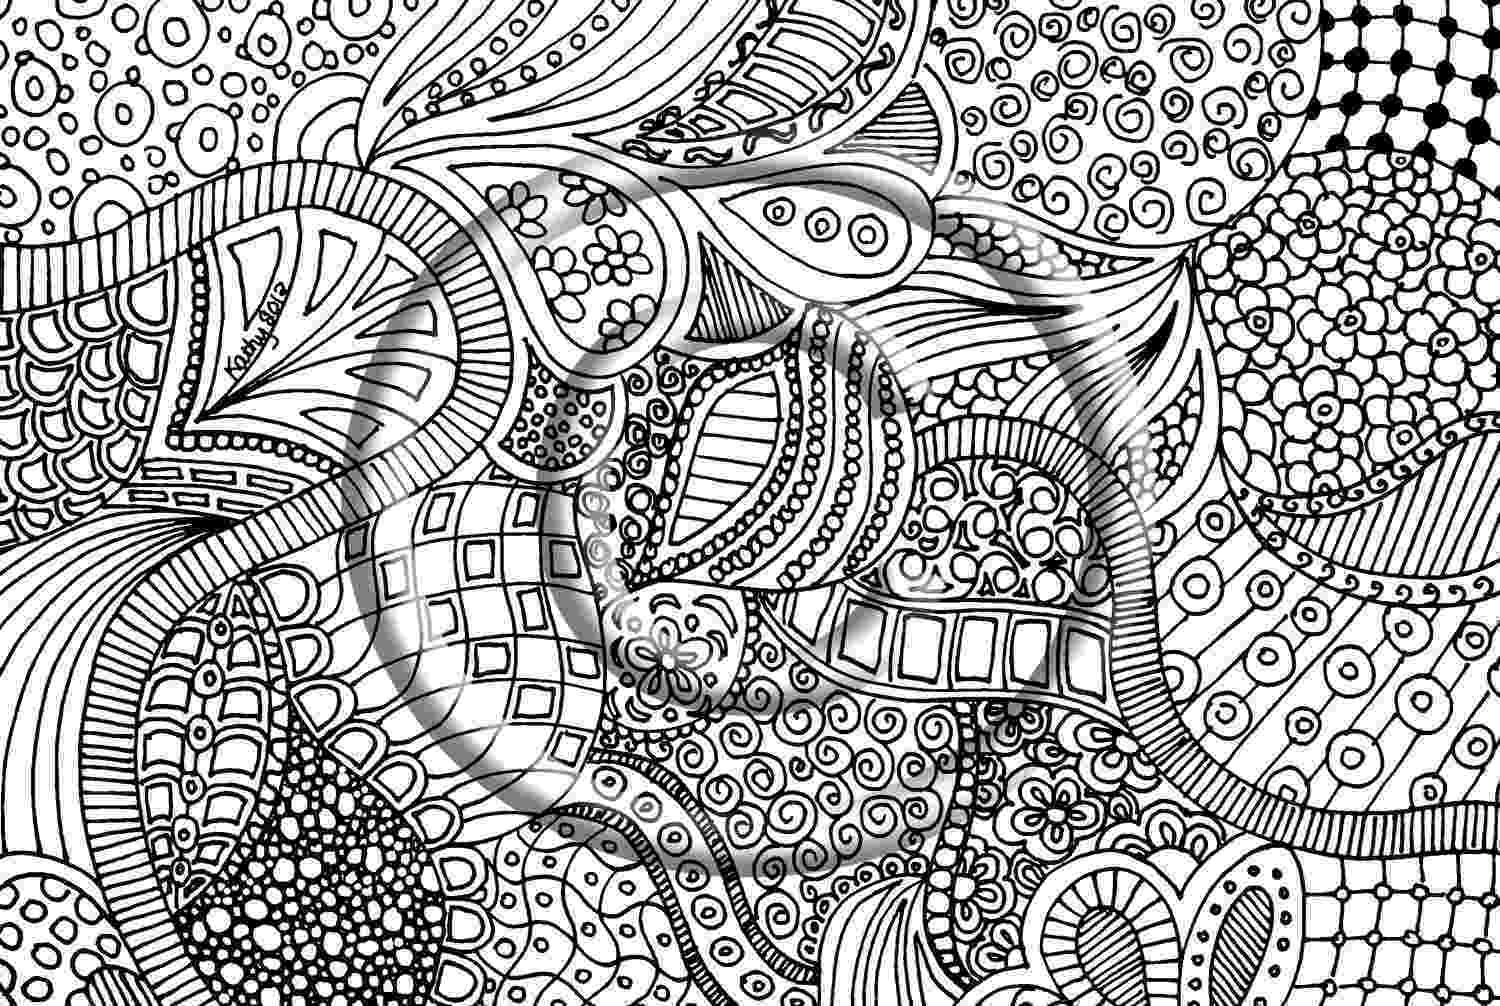 color zentangle printable download coloring page hand drawn zentangle color zentangle 